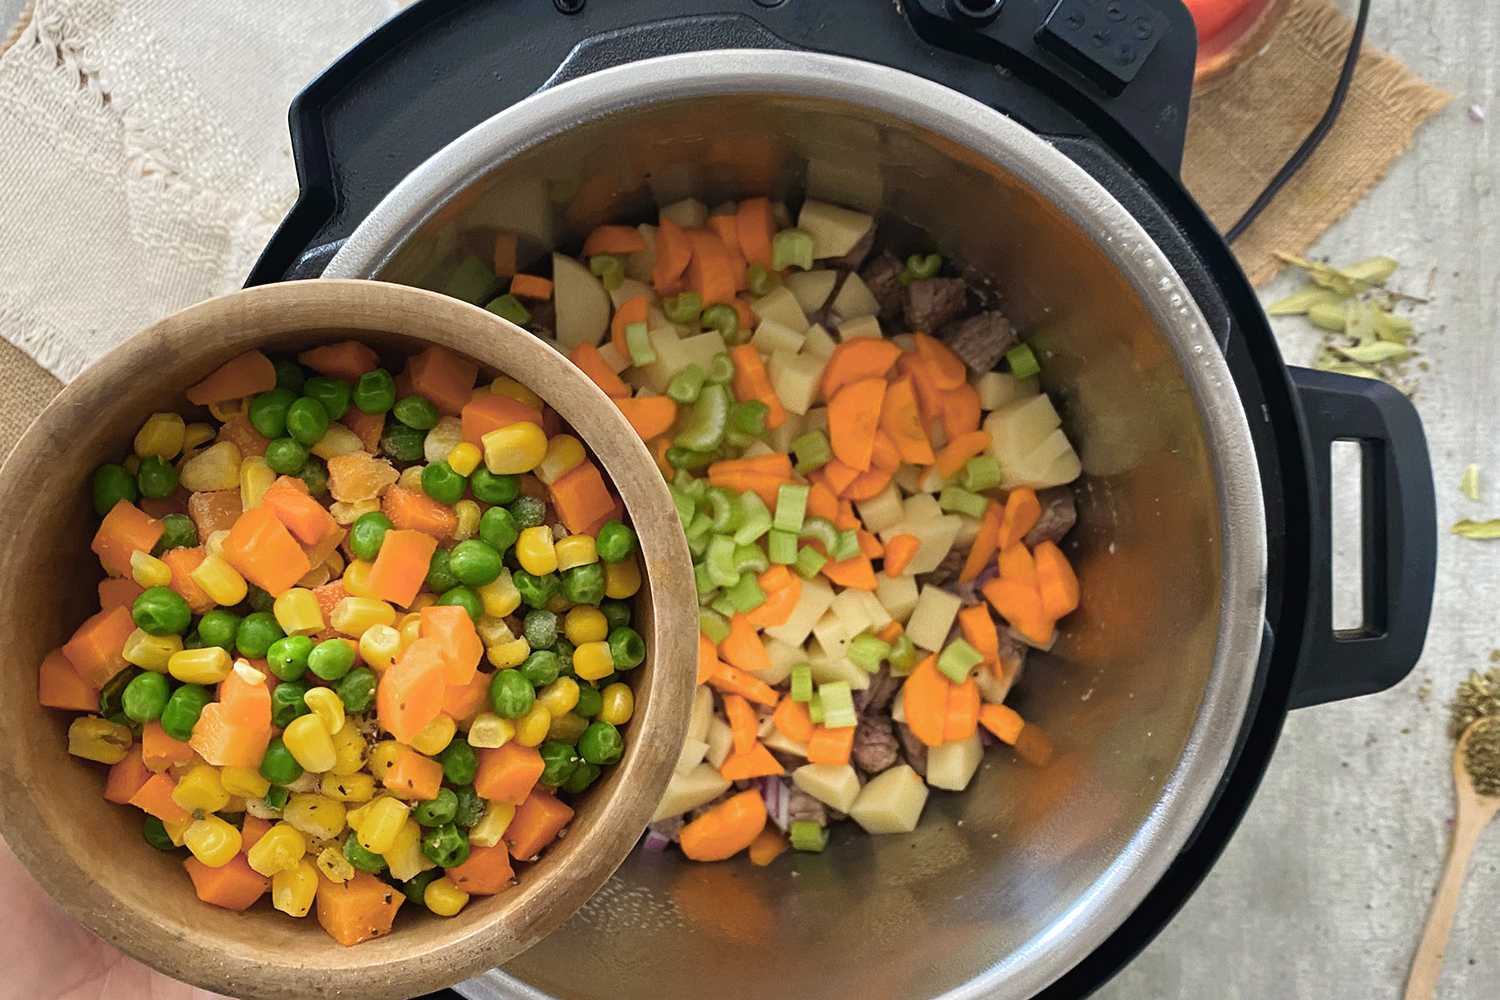 How To Cook Vegetables In A Pressure Cooker - Recipes.net